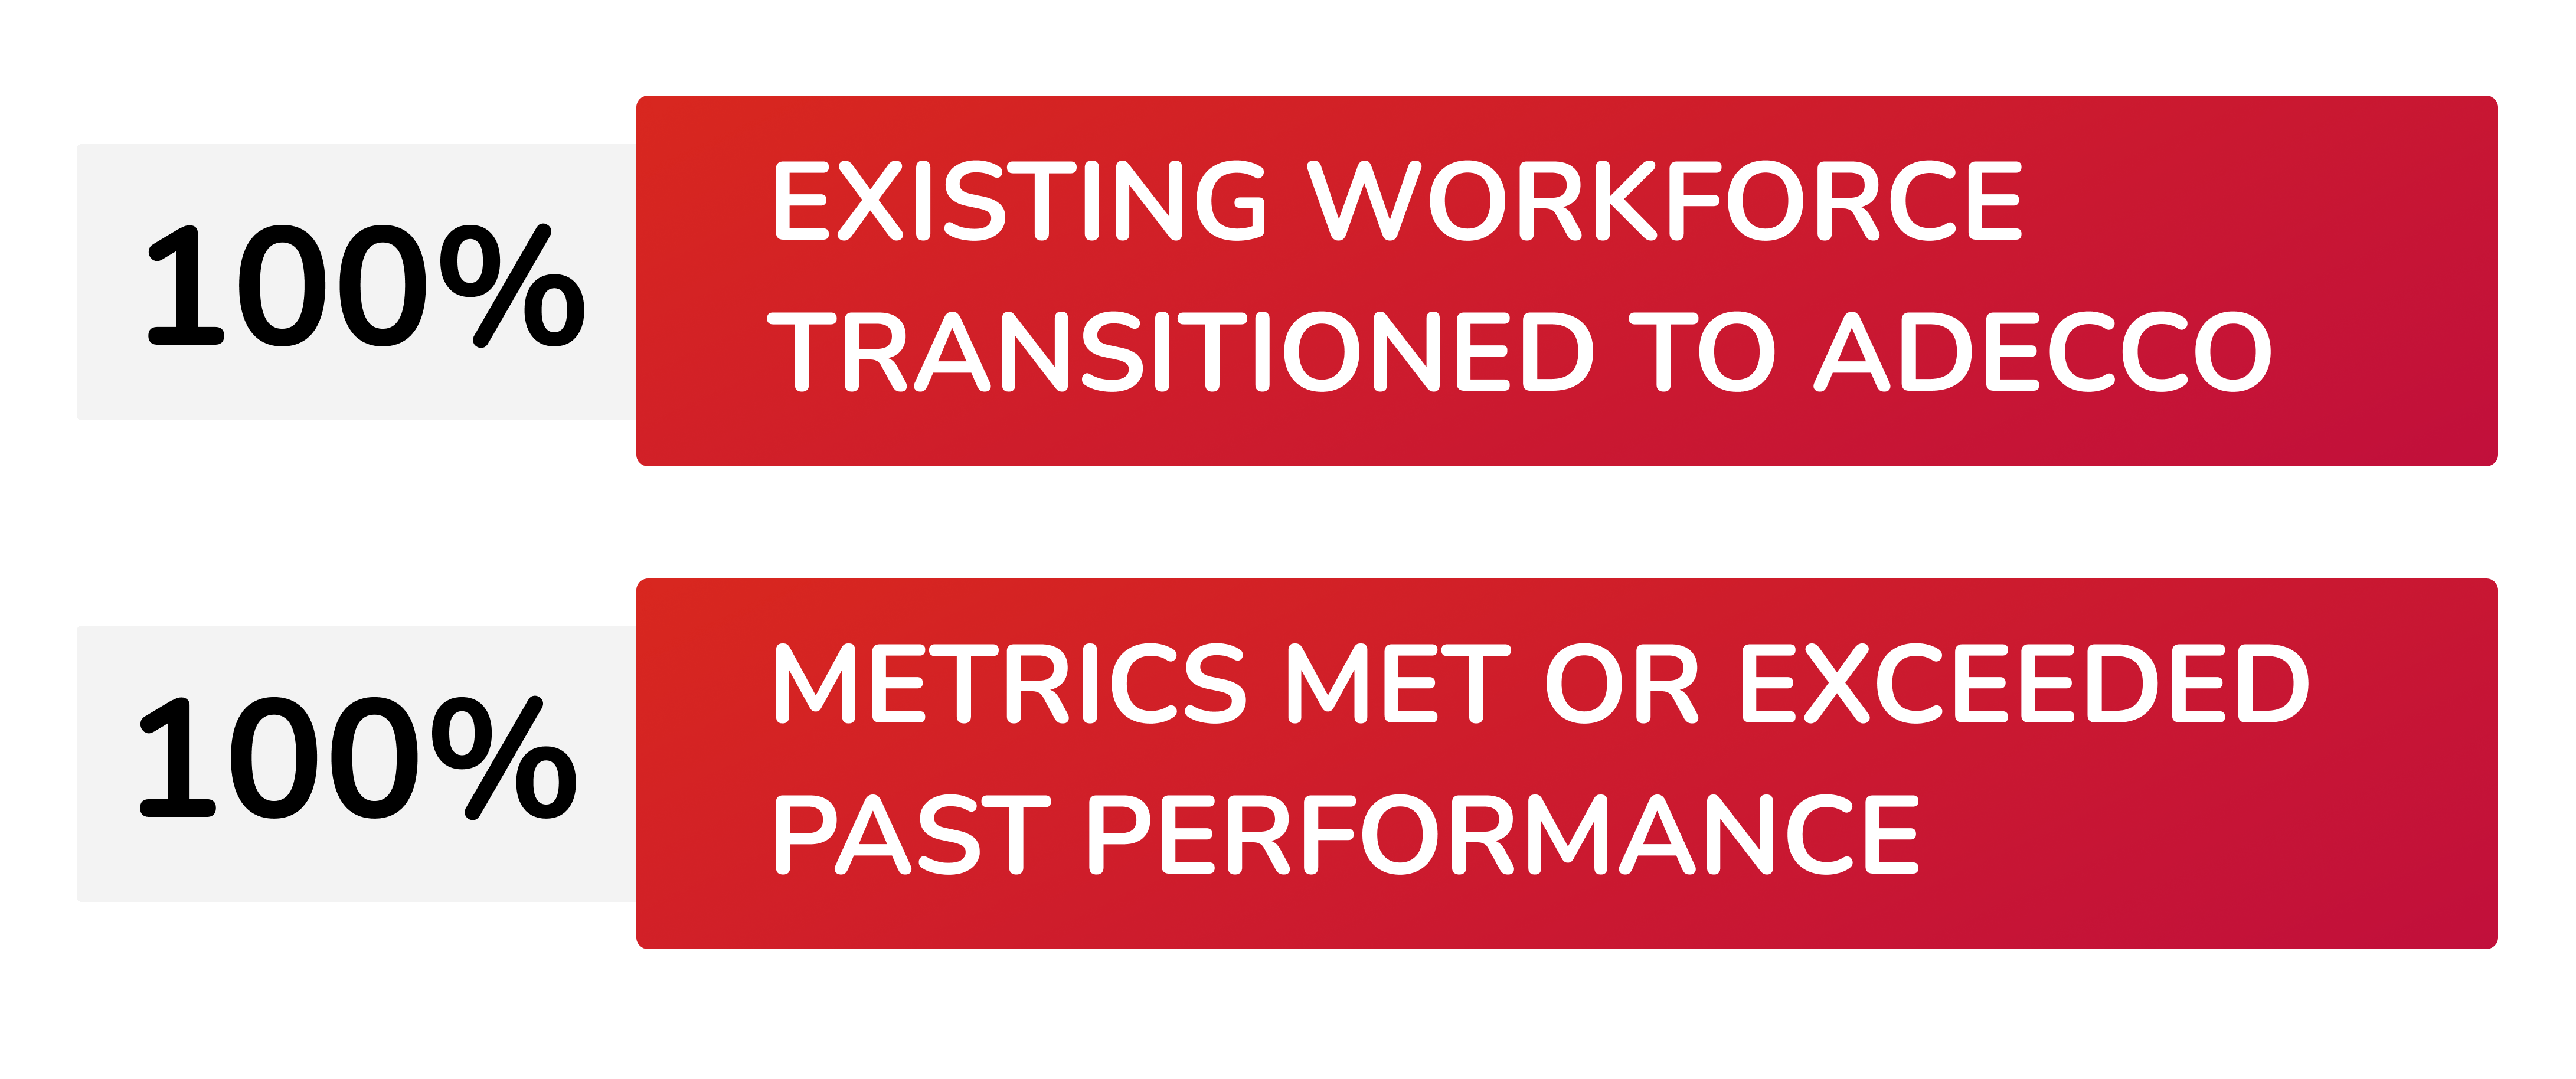 100% Existing workforce transitioned to Adecco; 100% Metrics met or exceeded past performance